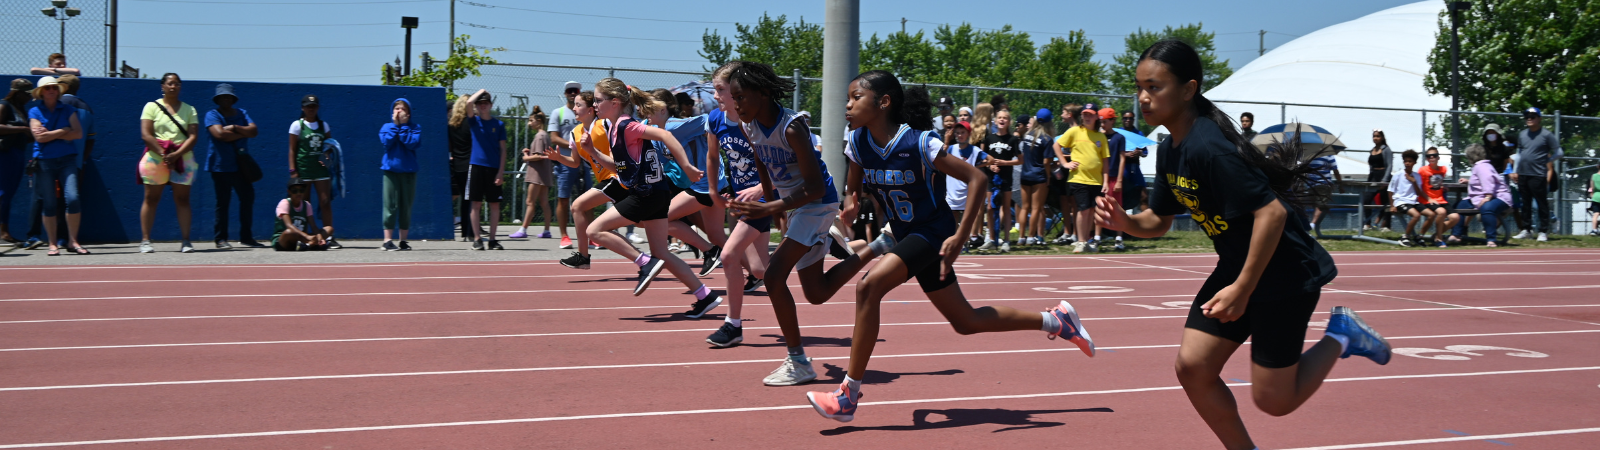 young girls running on a track